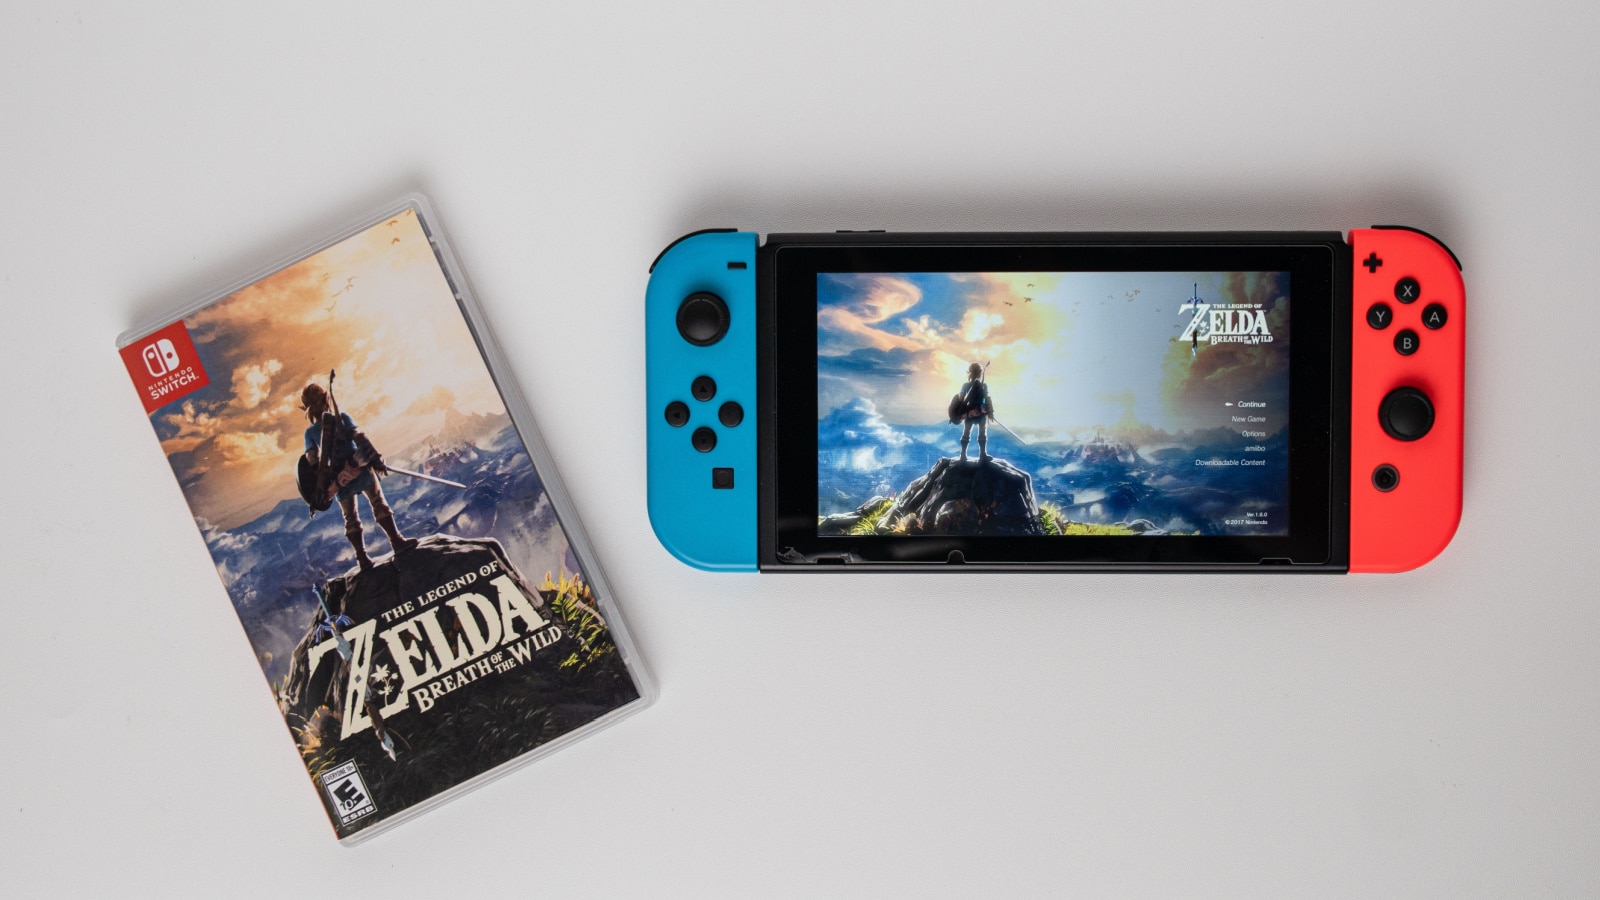 Jakarta, Indonesia - September 2nd, 2022: The Legend of Zelda Breath of The Wild game on a Nintendo Switch console.